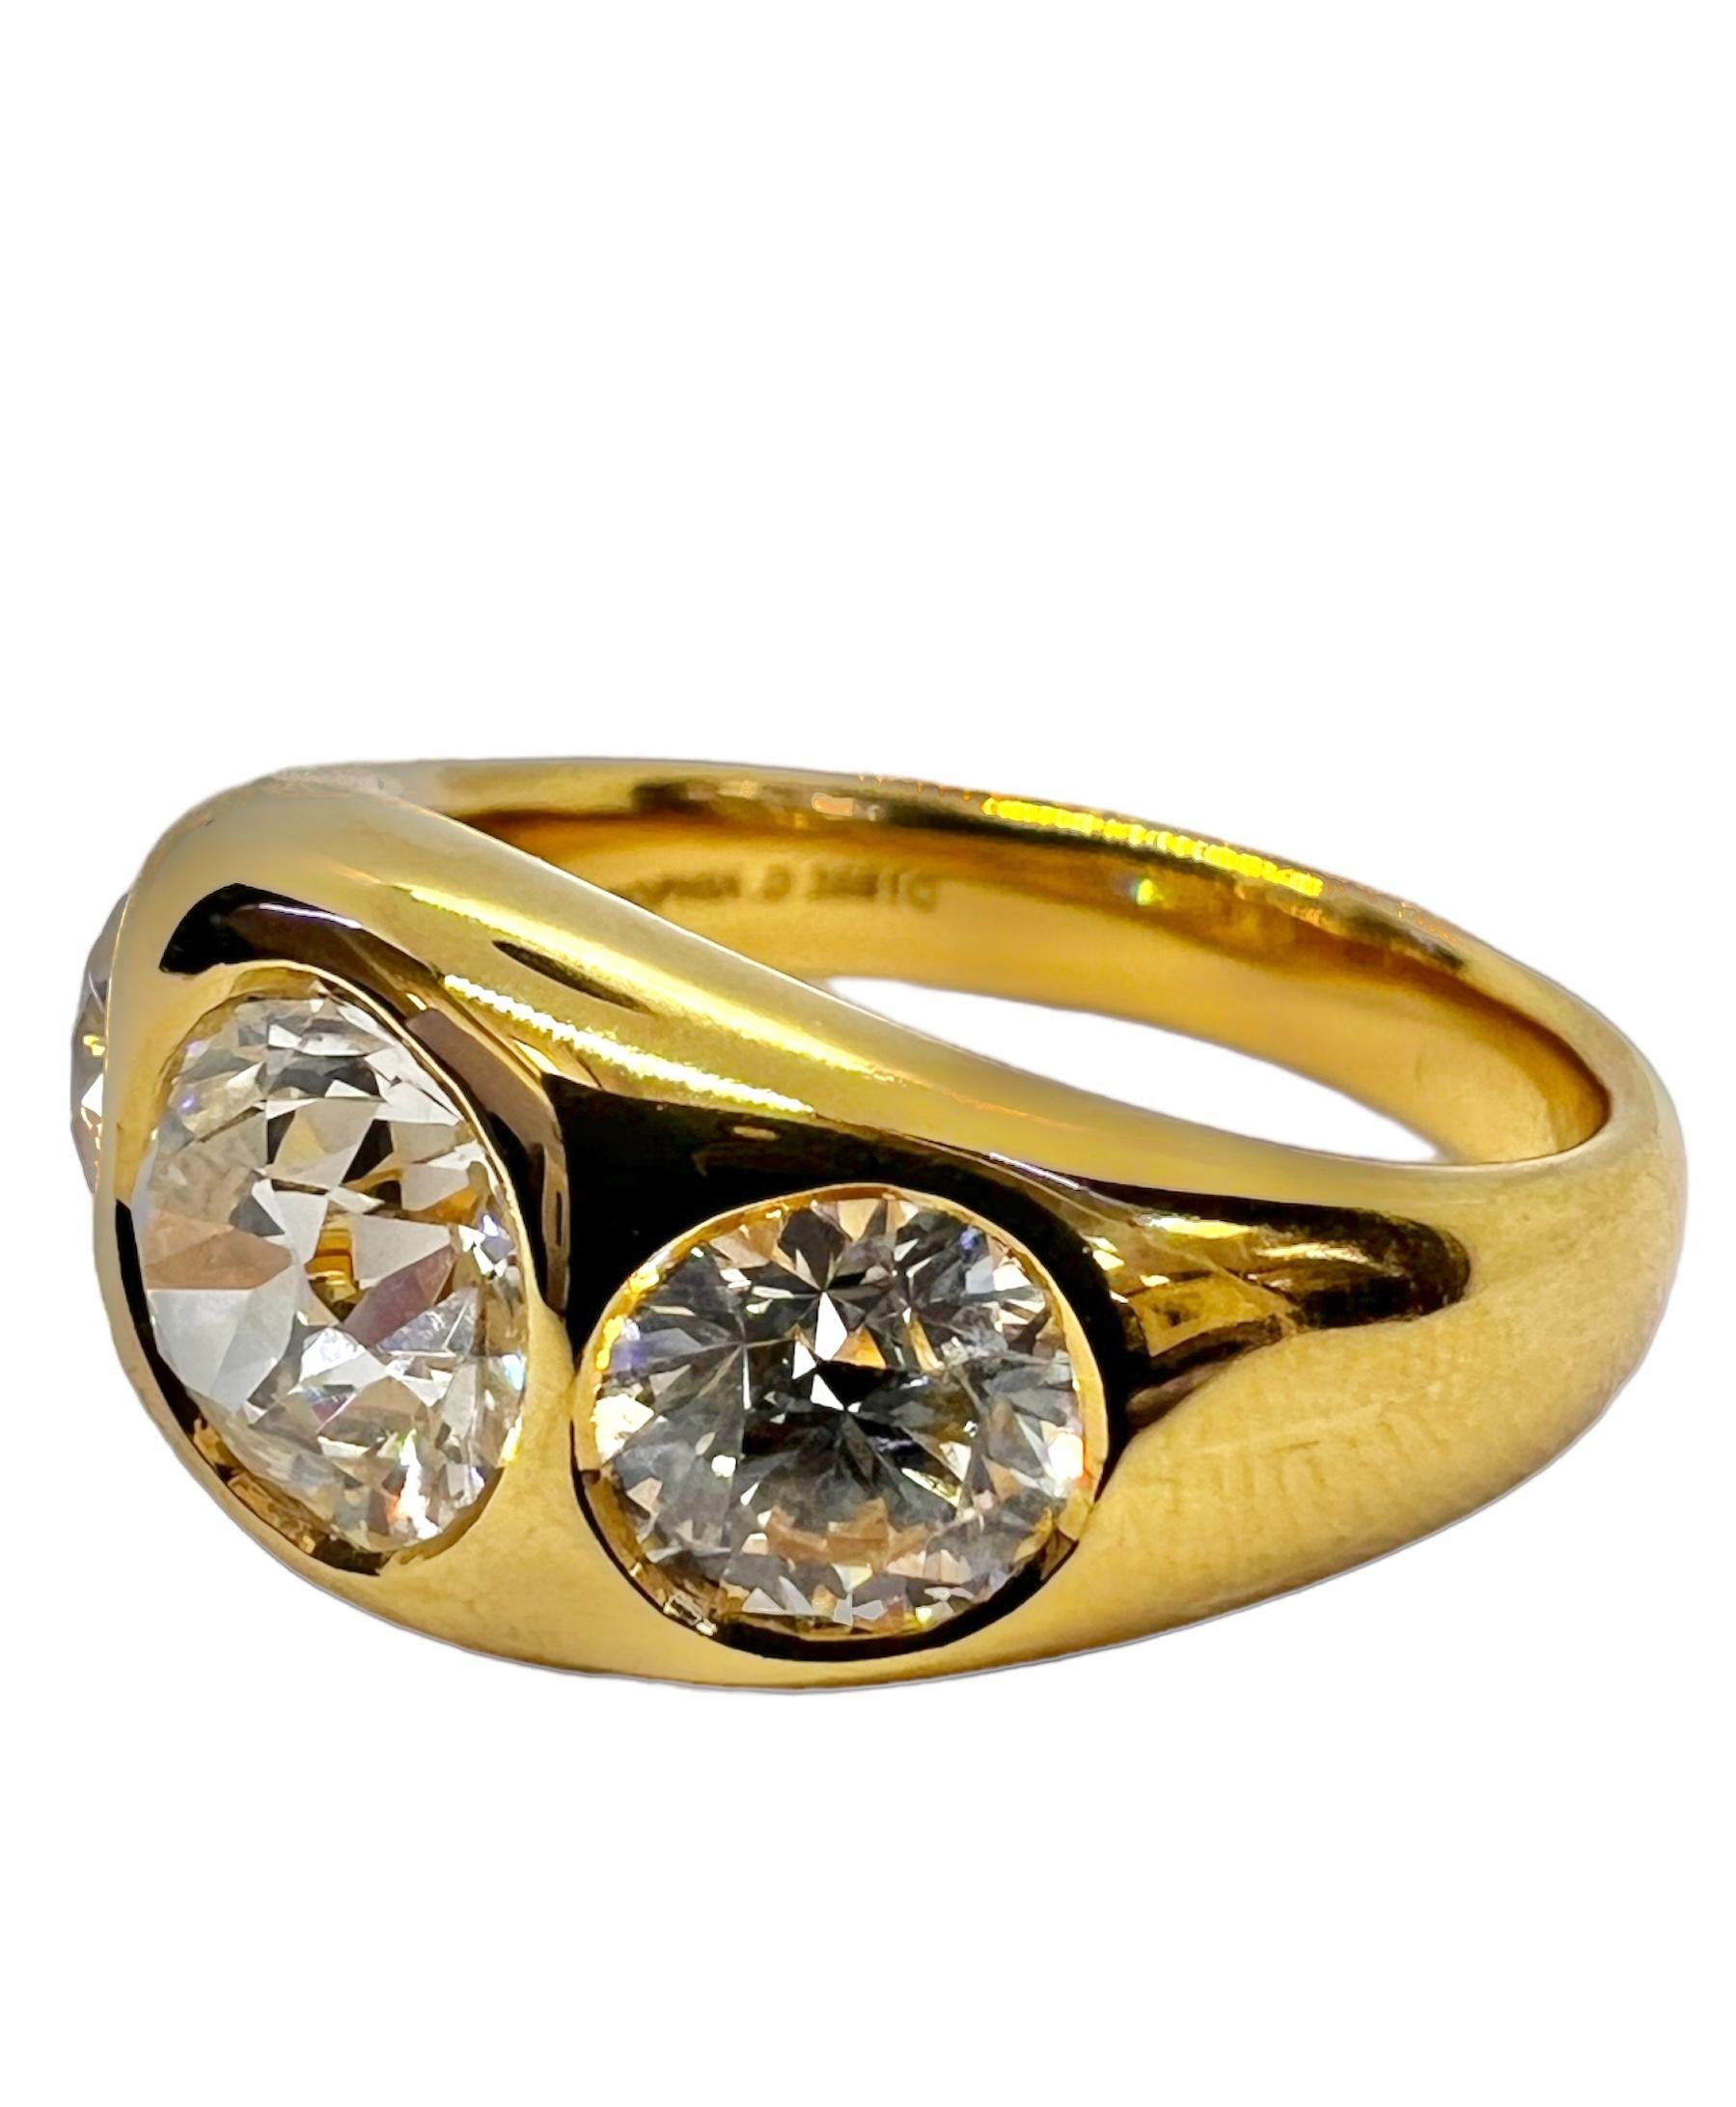 GIA certified diamond ring set in 18K yellow gold with 1.63 carat LVS2 diamond, 0.44 carat HVS2 diamond and 0.39 carat HVS1 carat diamond. 

Sophia D by Joseph Dardashti LTD has been known worldwide for 35 years and are inspired by classic Art Deco